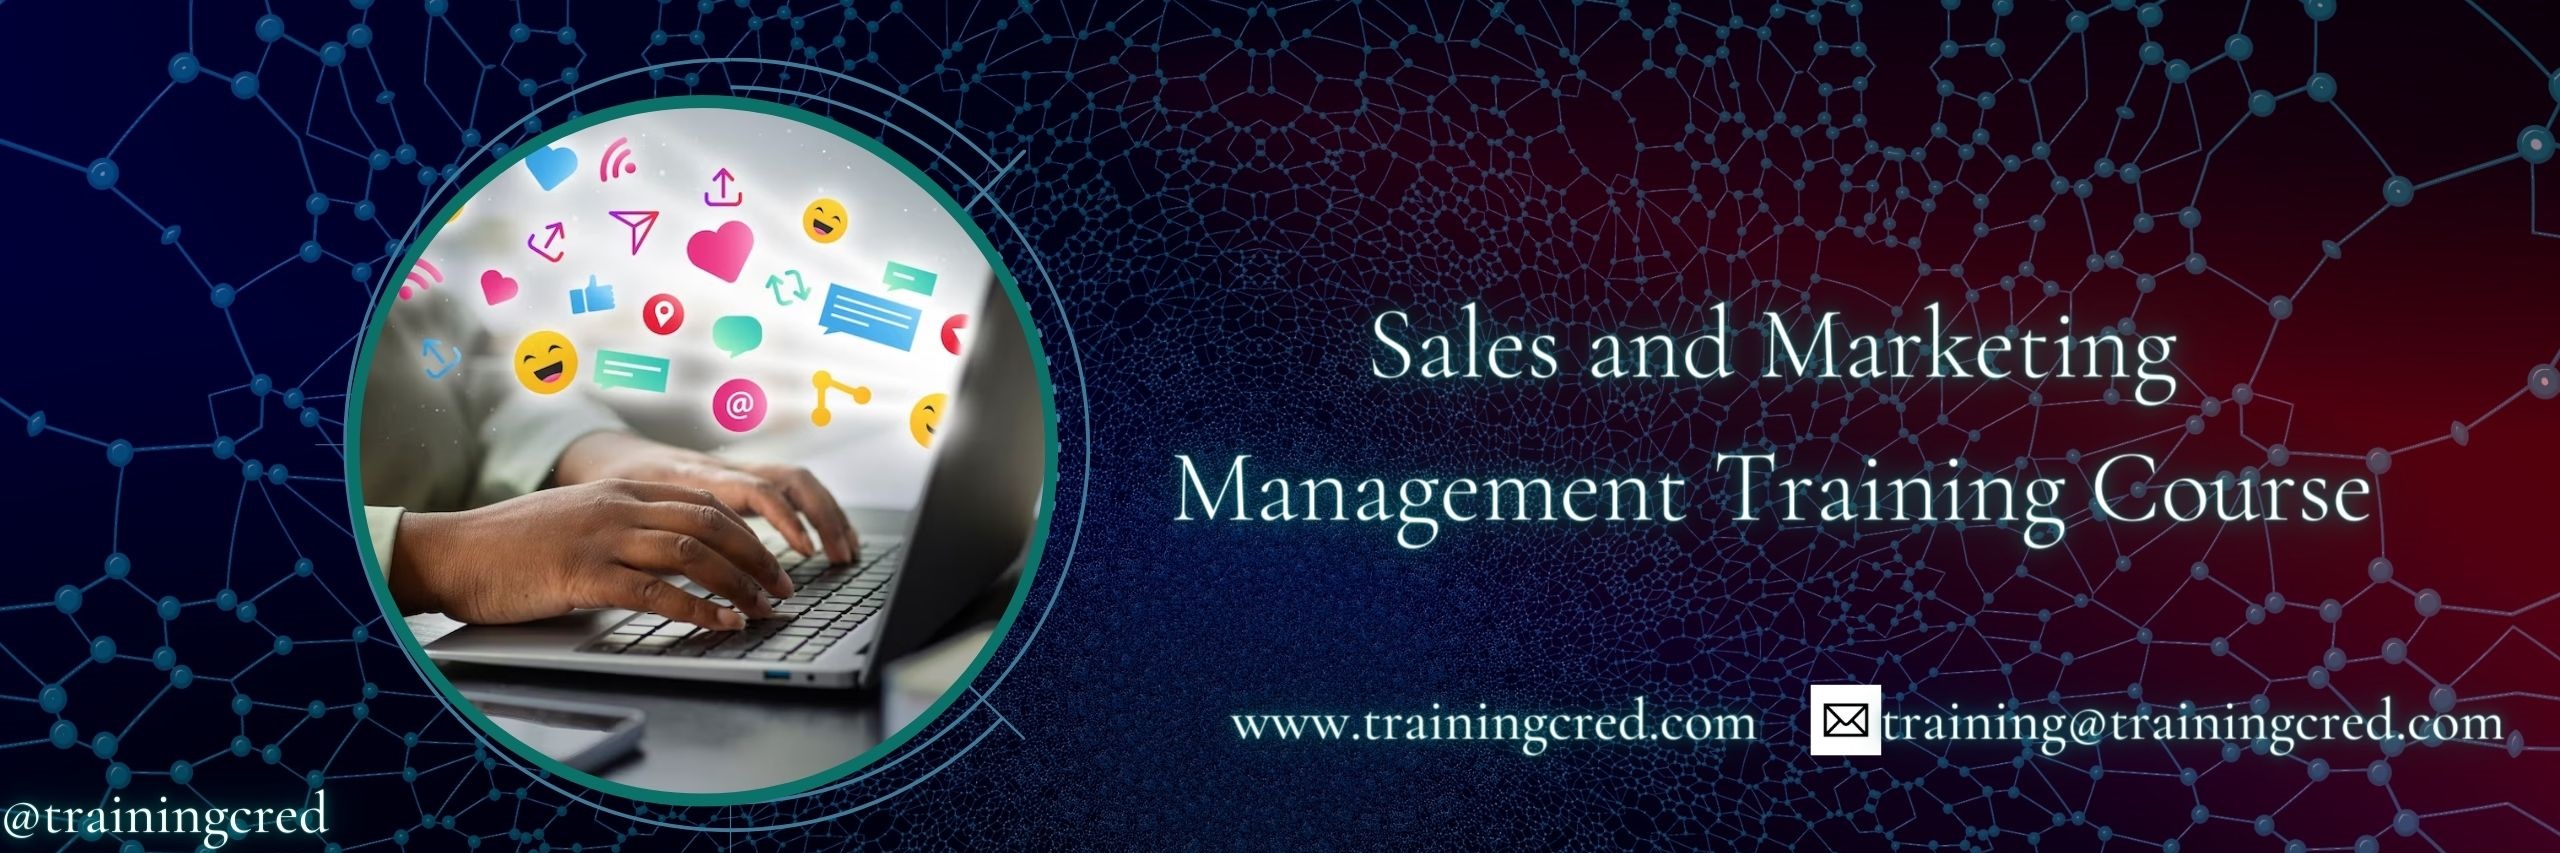 Sales and Marketing Management Training